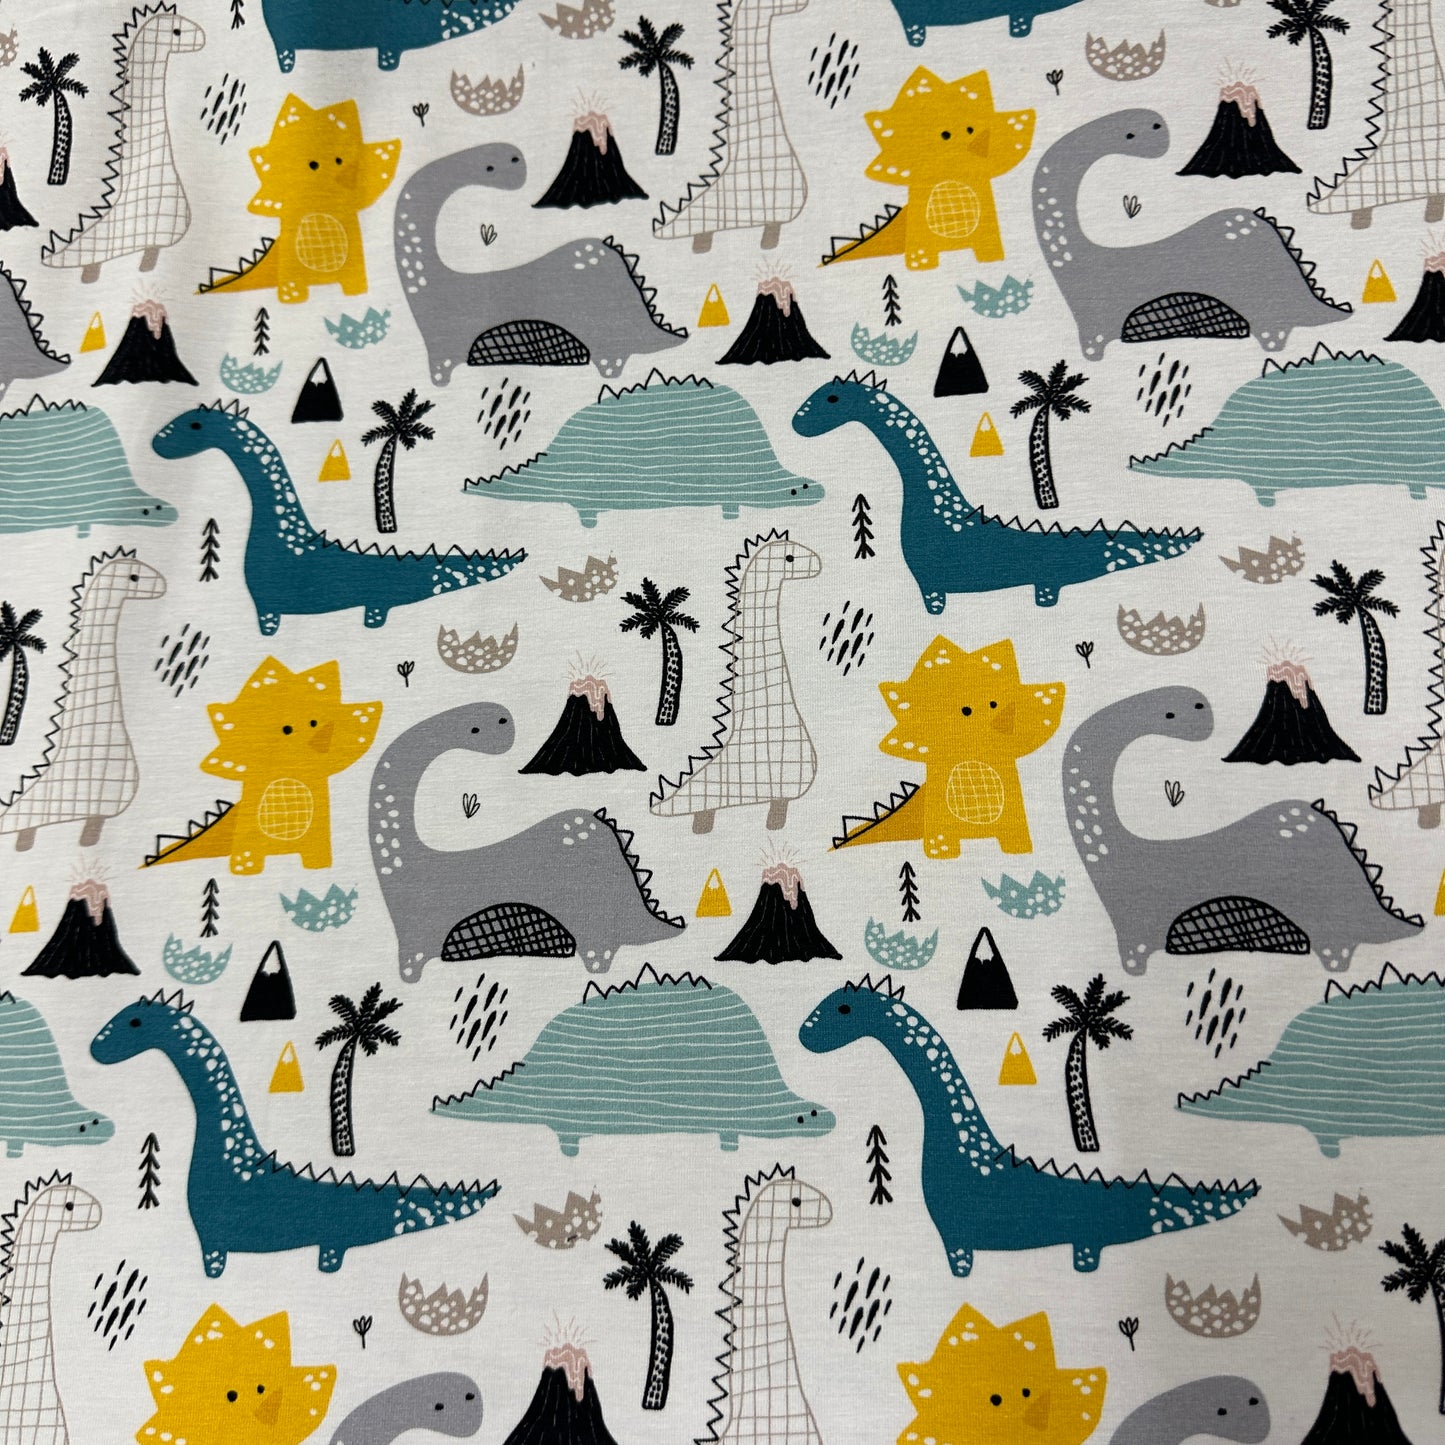 Teal and Gold Dino on Bamboo/Spandex Jersey Fabric